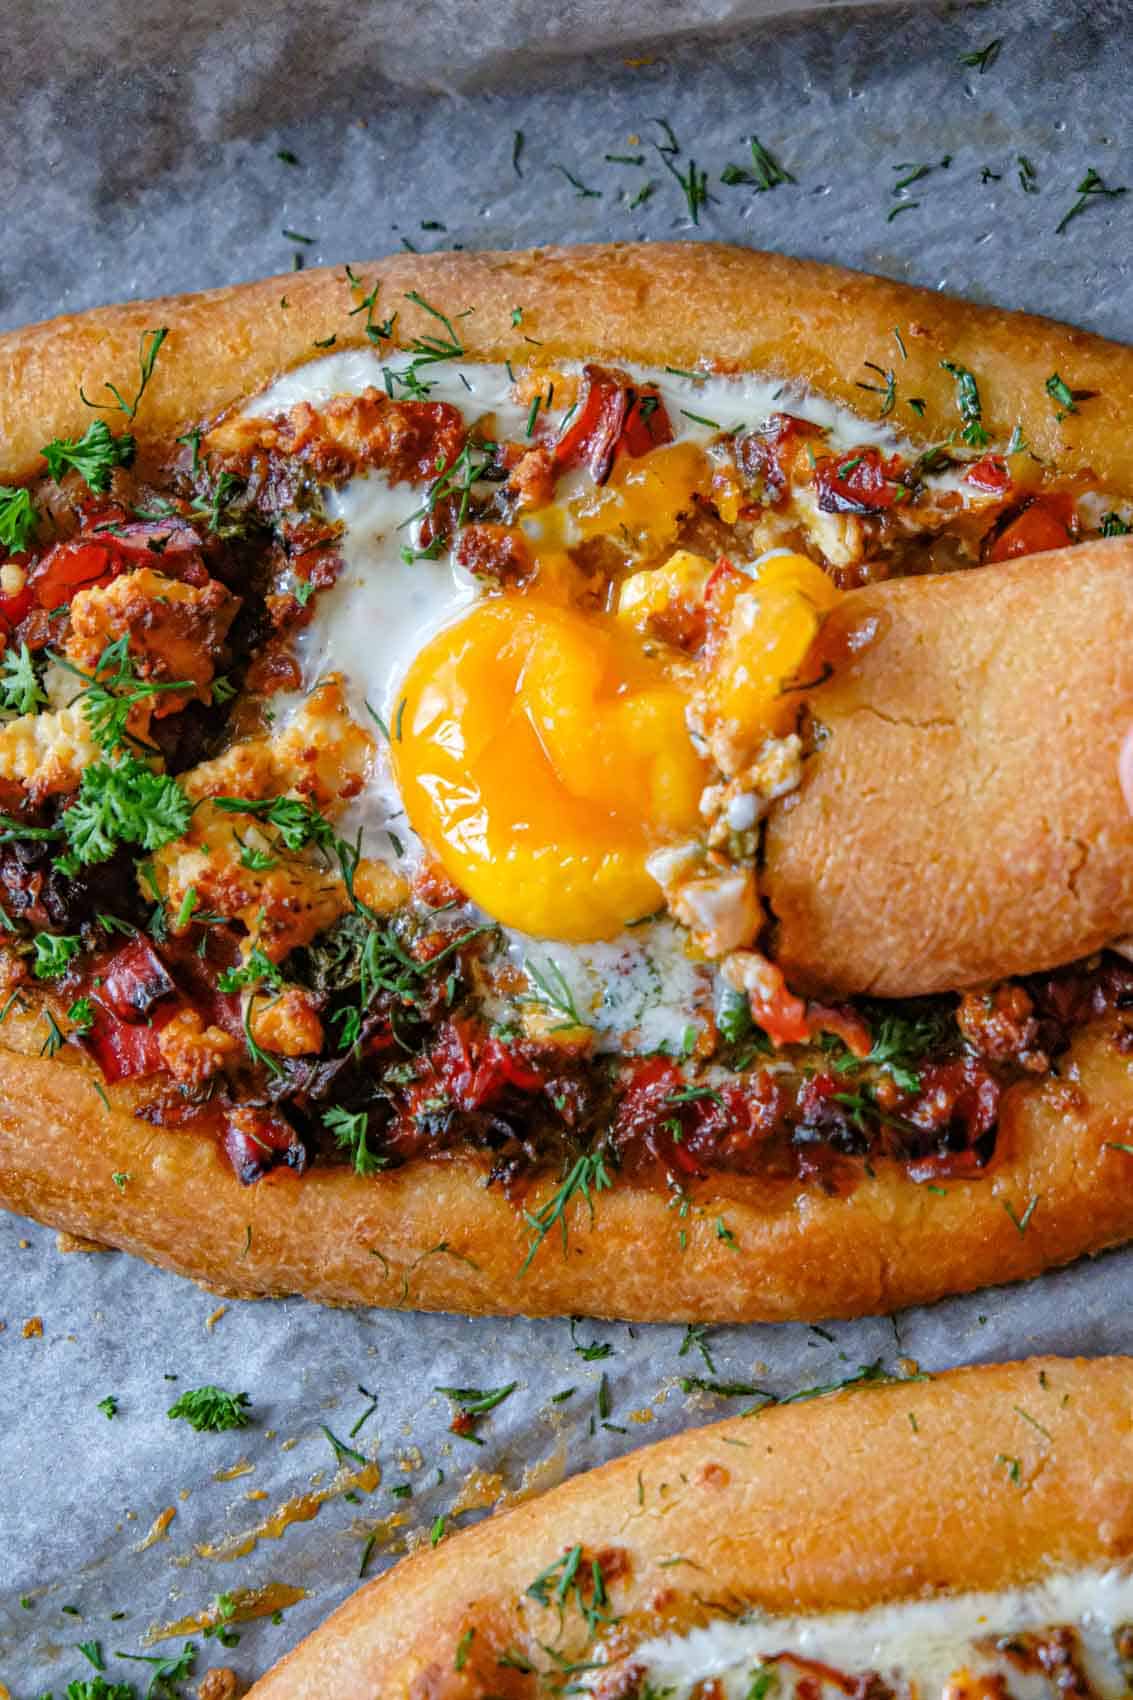 serving suggestion shakshuka bread with eggs and melted butter - piece of bread dunked into yolk